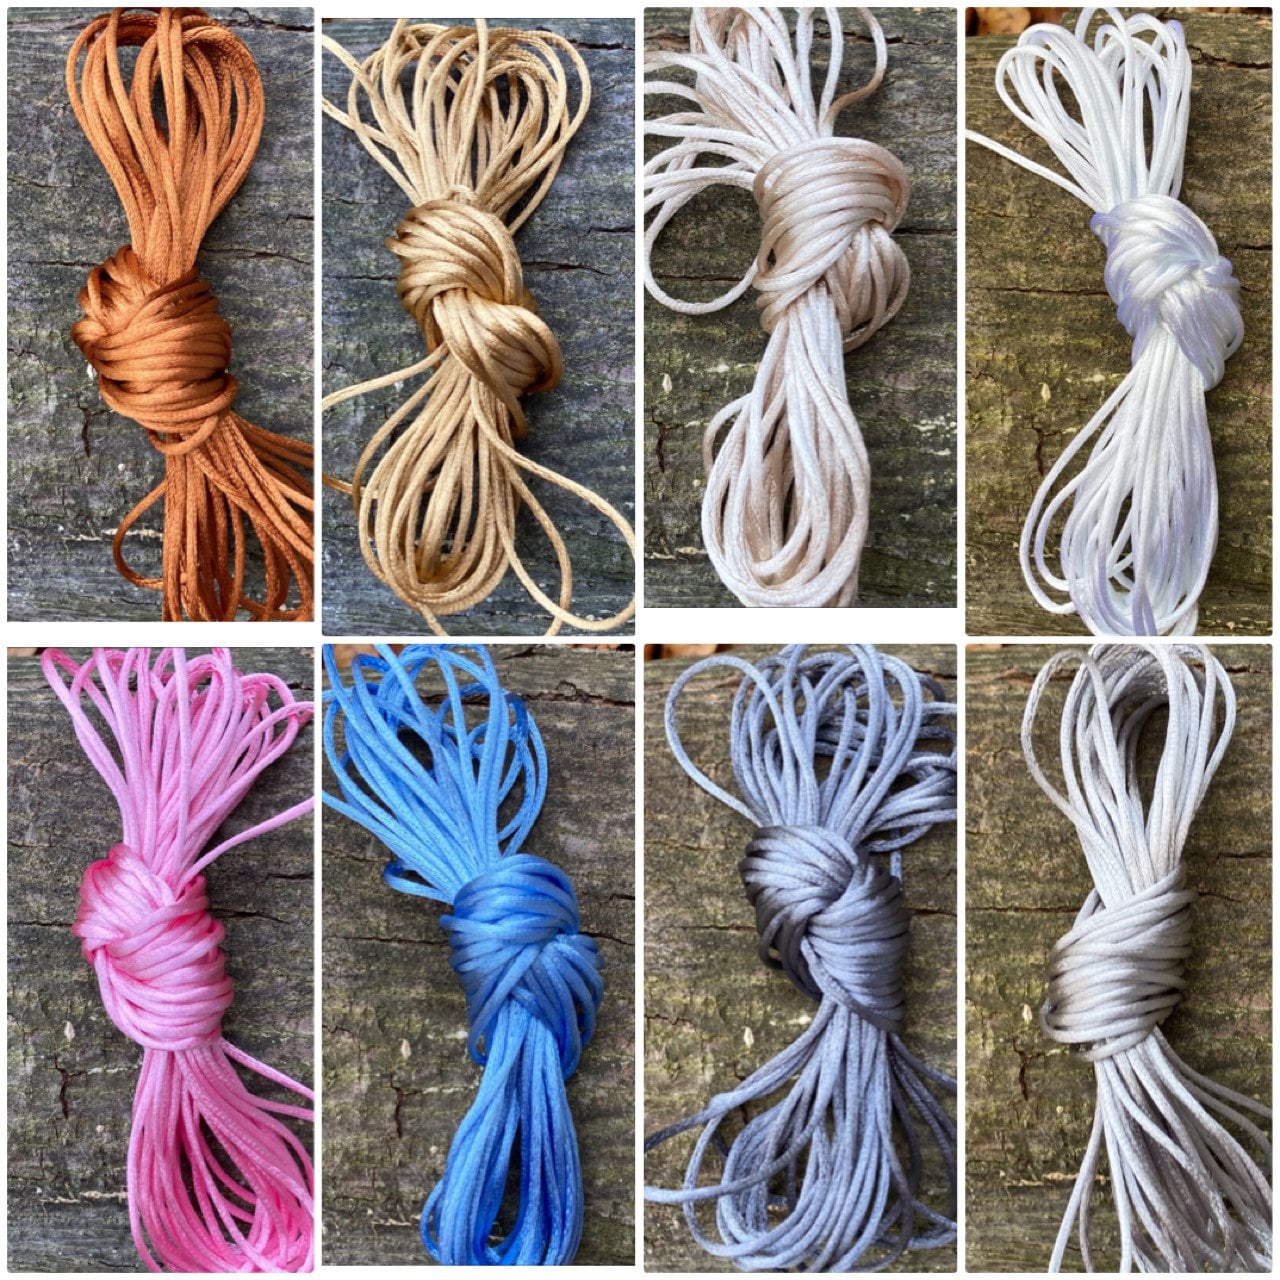 Bastex 2mm Nylon Satin Silk Cords with 21 Colors. Over 280 Yards. Rat Tail  Cord Perfect for Jewelry Making, Necklace Beading, Macrame, Knotting